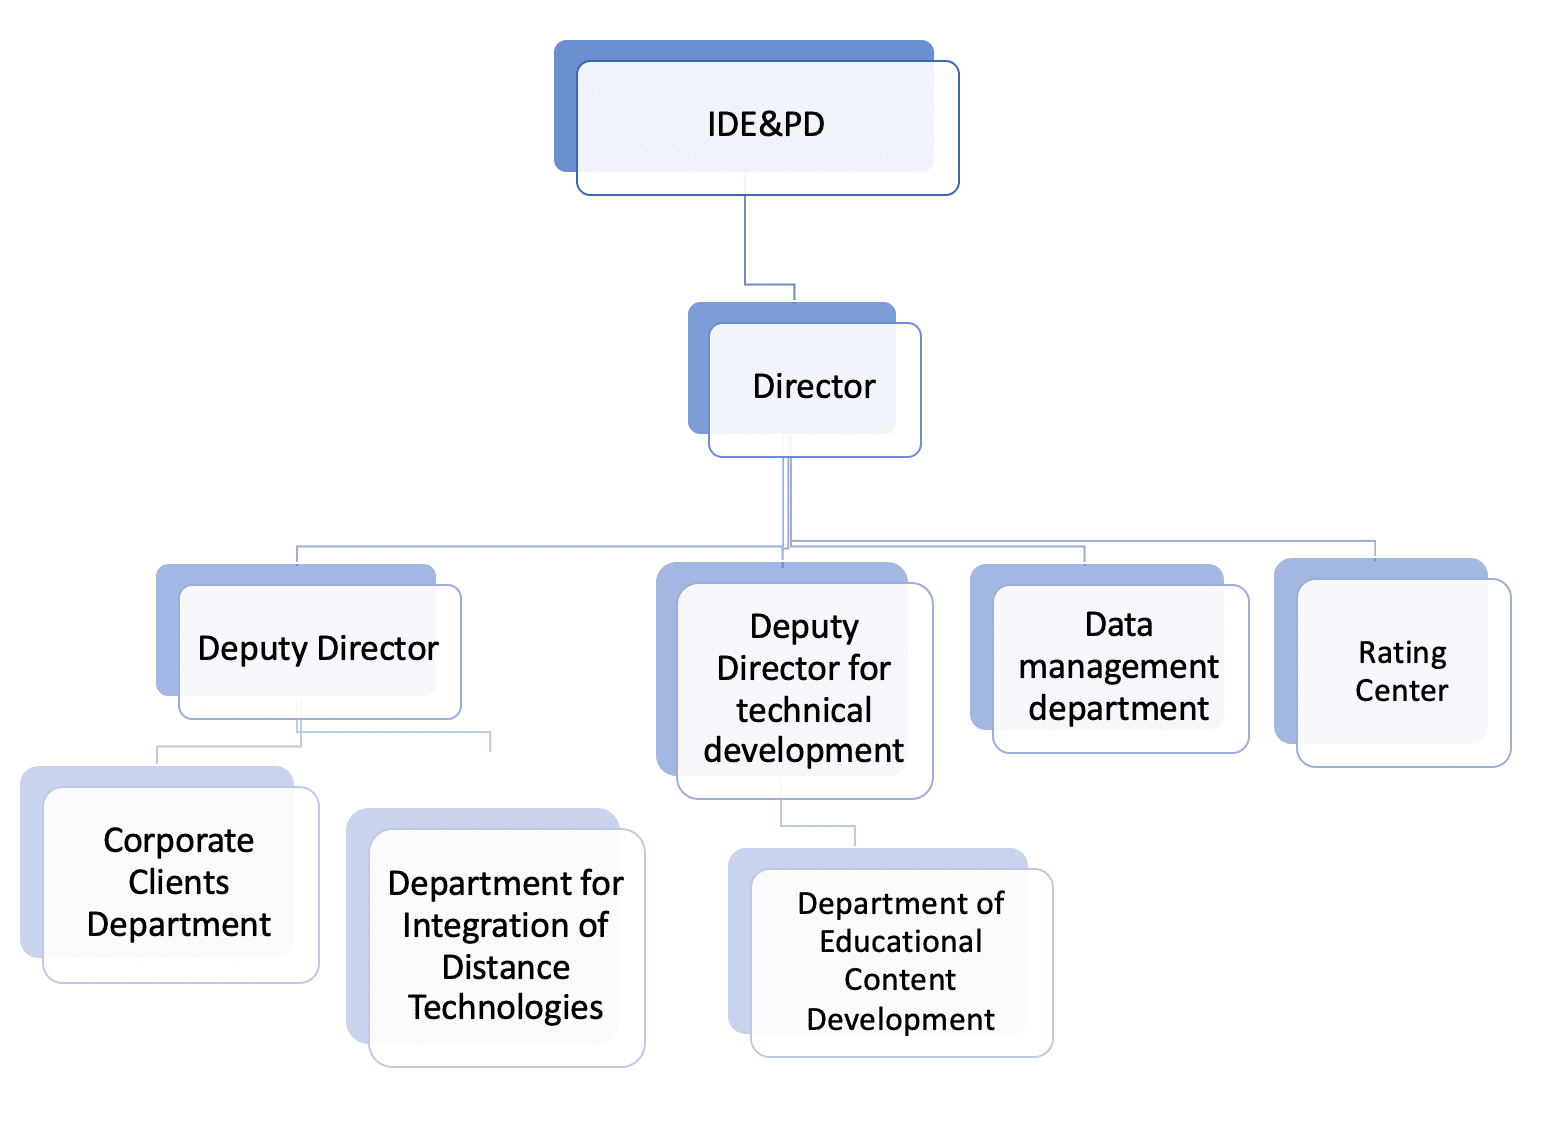 Organizational structure of the Institute of Distance Education and Professional Development